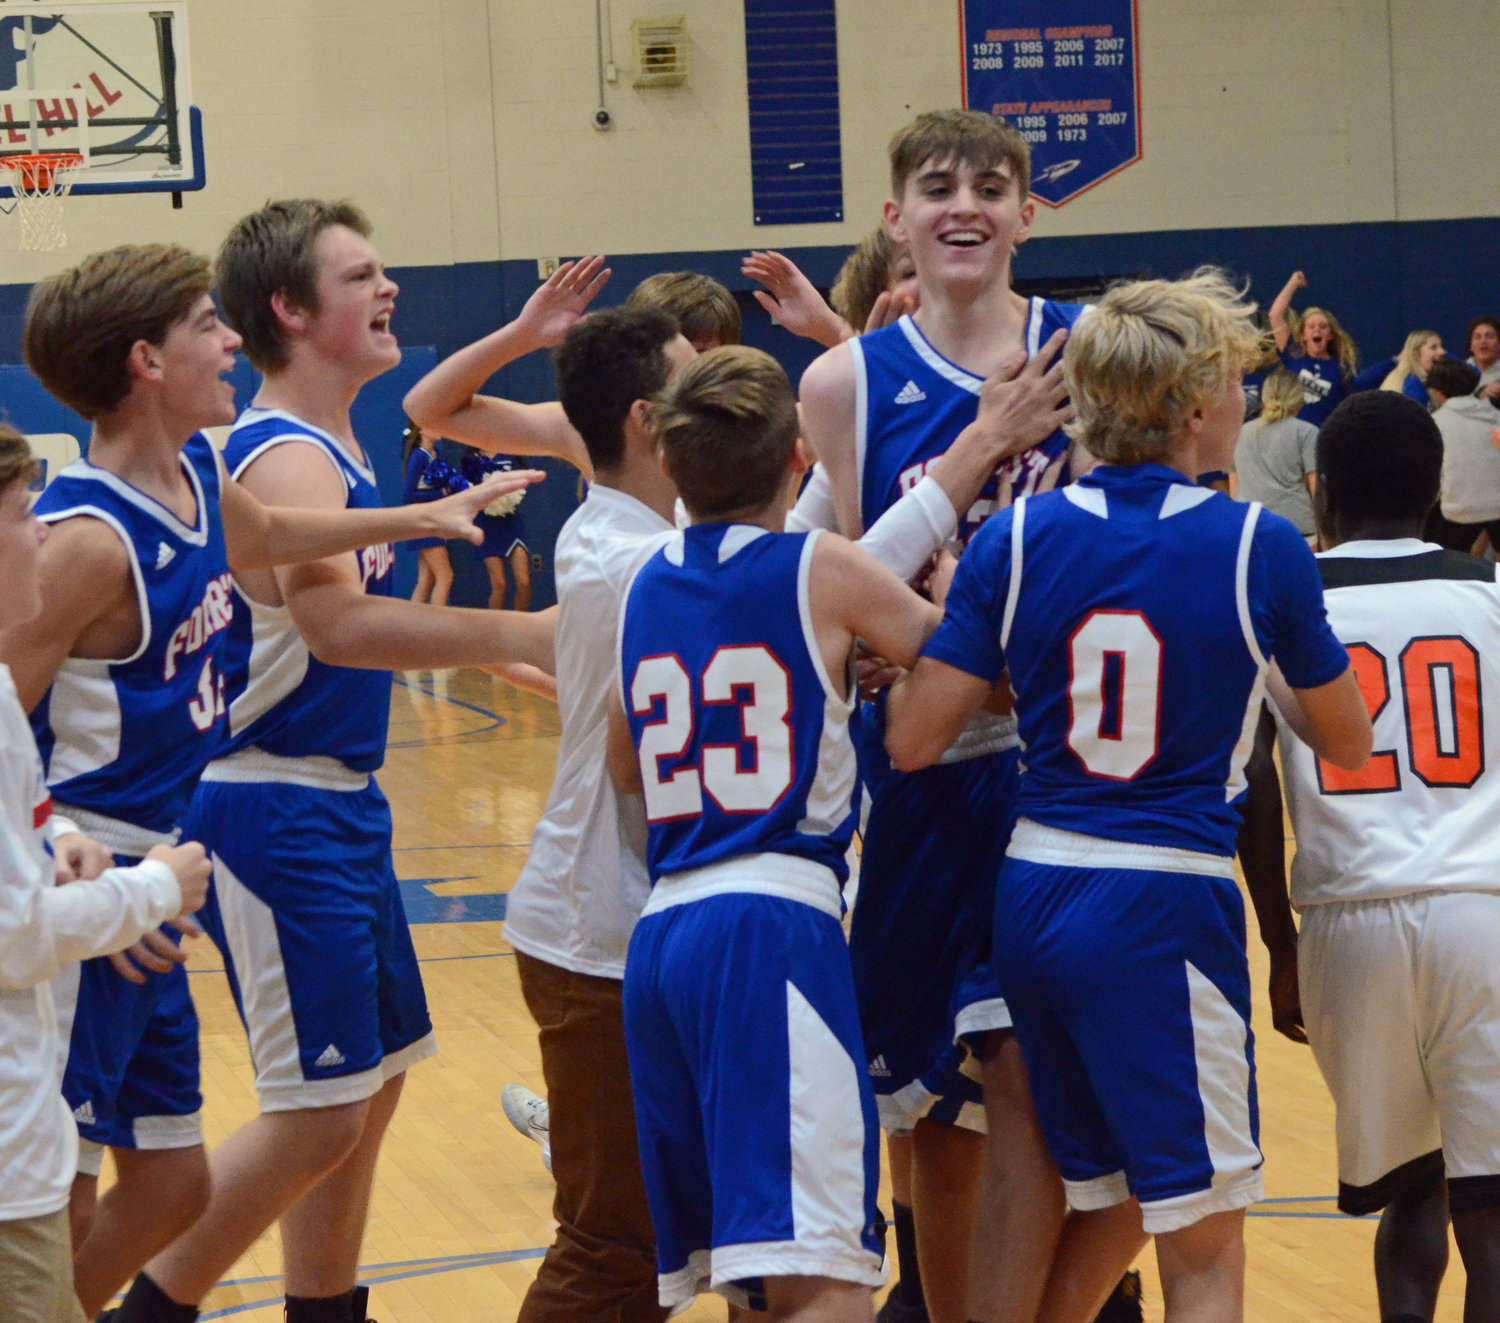 The Rockets mob Josh Doud after the eighth-grader made the game-winning basket.